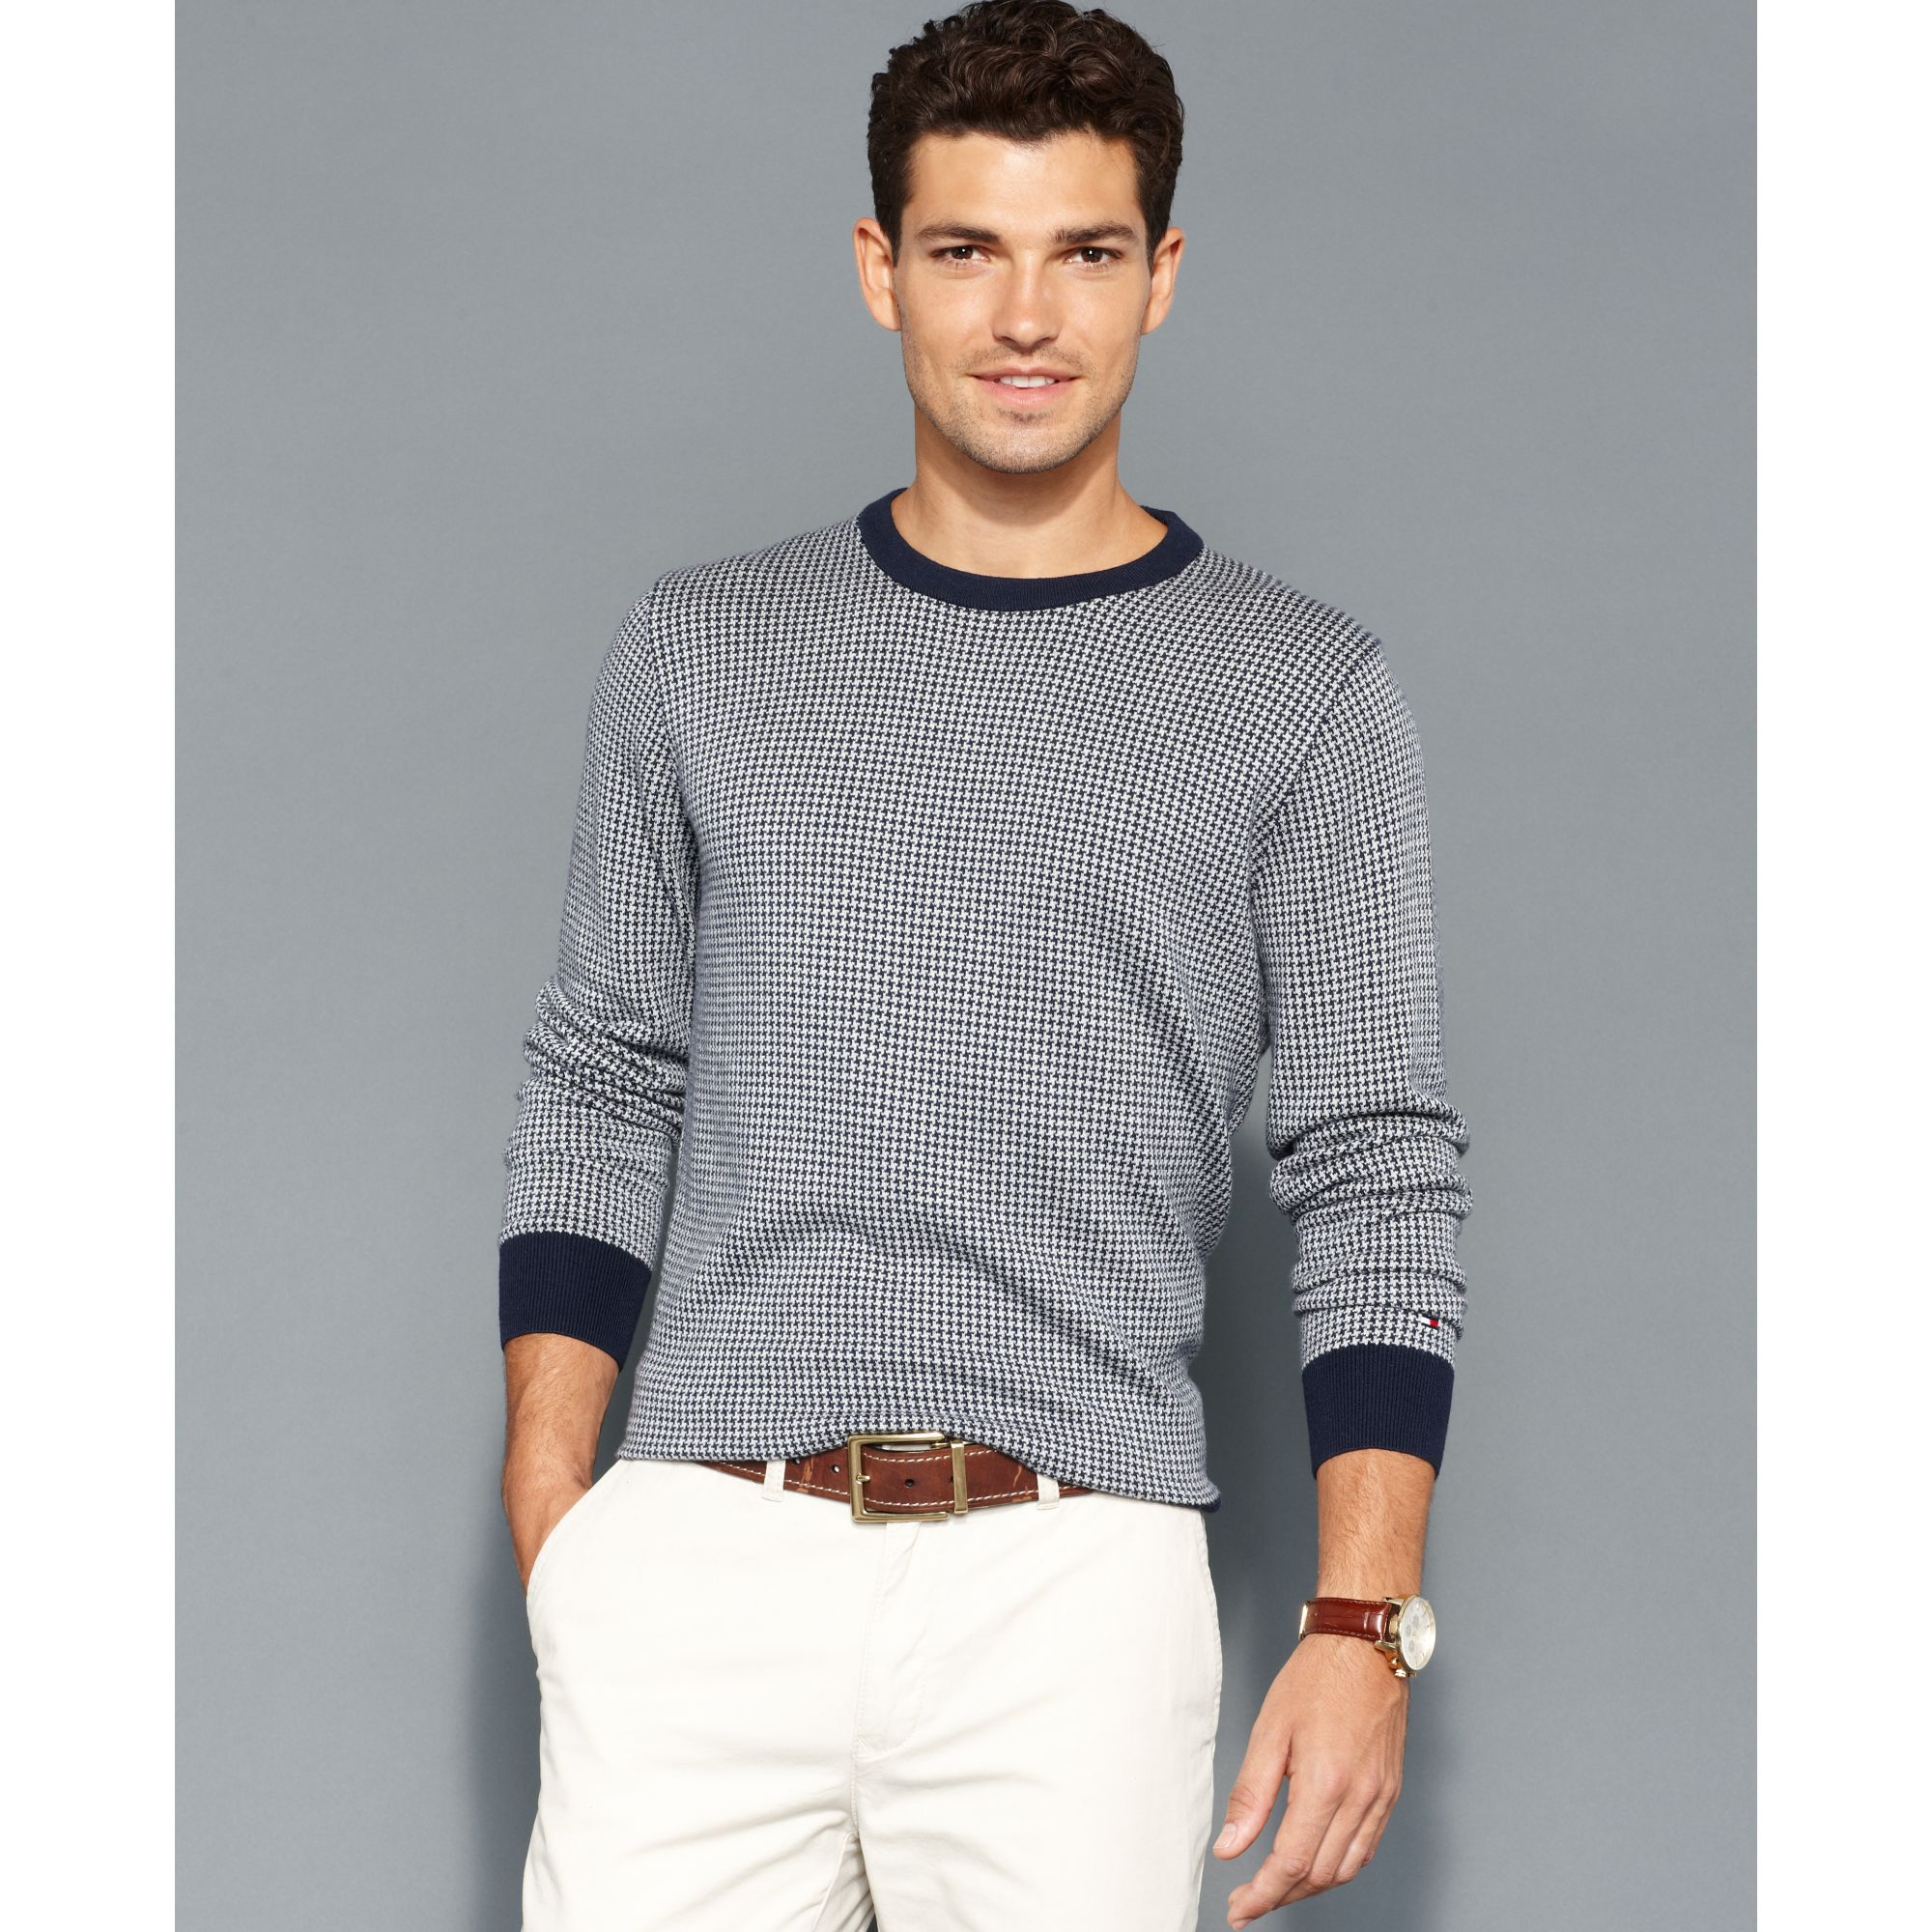 Lyst - Tommy Hilfiger American Houndstooth Sweater in Blue for Men